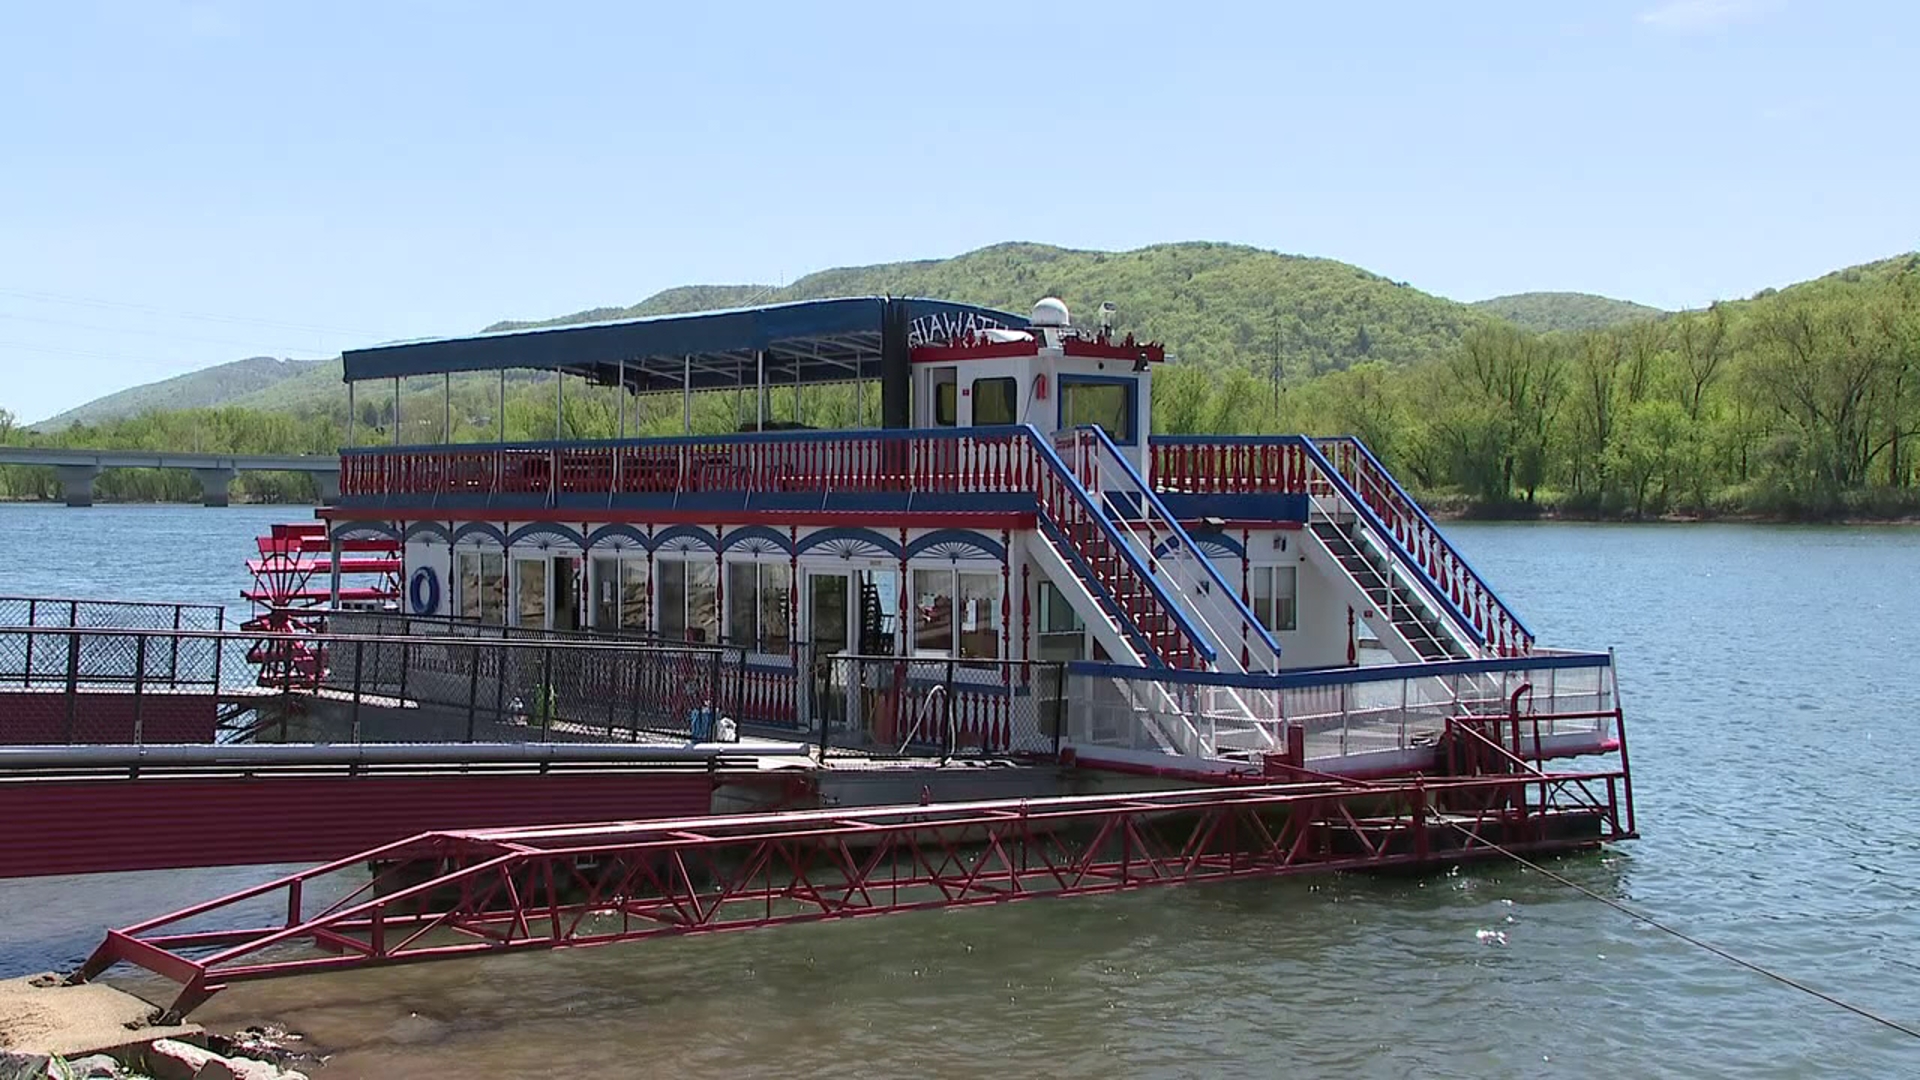 The paddlewheel riverboat is getting ready to embark on its 43rd season on the Susquehanna River in Williamsport.